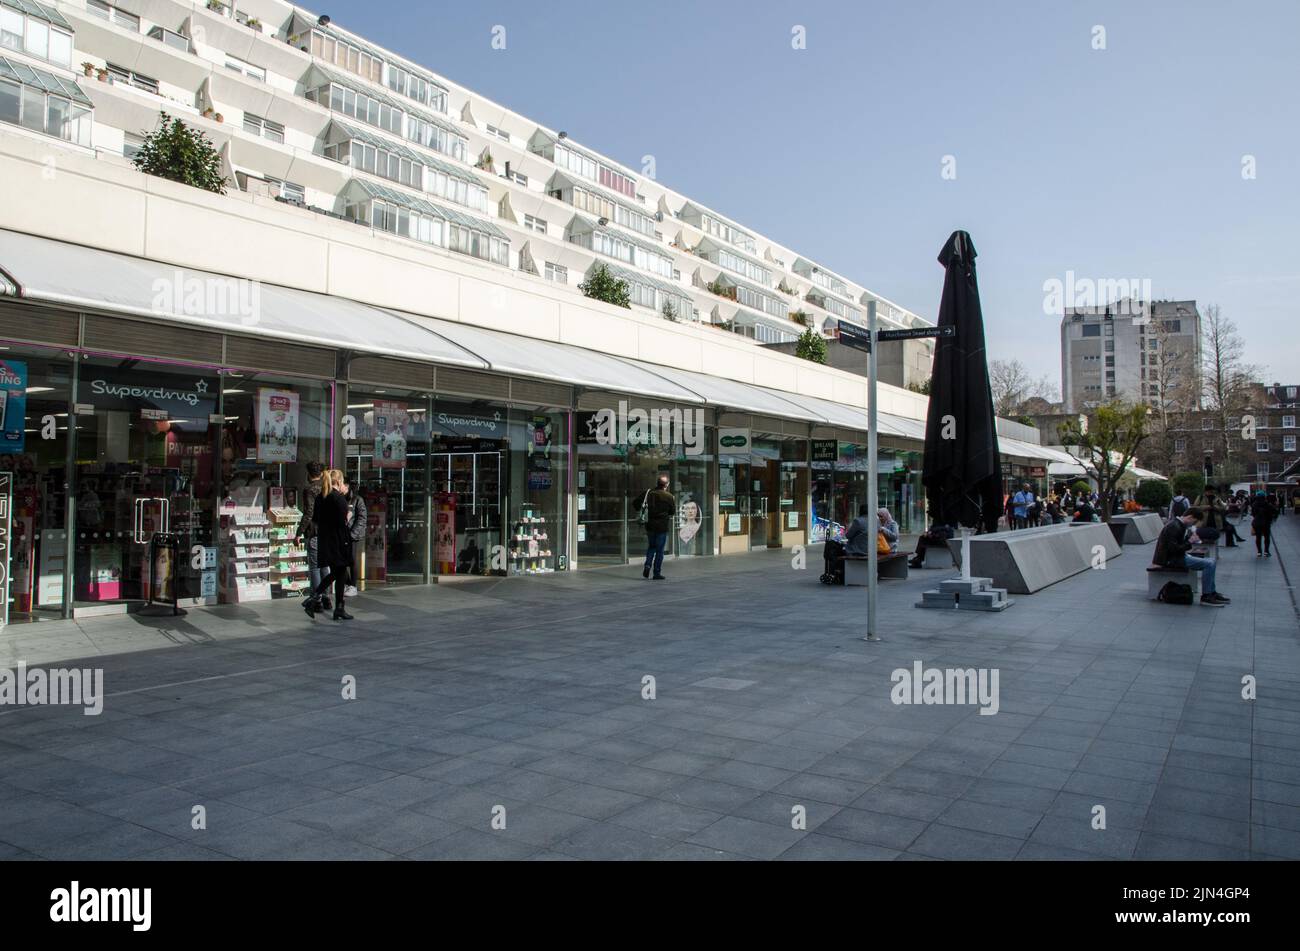 London, UK - March 21, 2022: Shoppers strolling along the Brunswick Shopping Centre in Bloomsbury, Central London.  Designed in a brutalist style by t Stock Photo